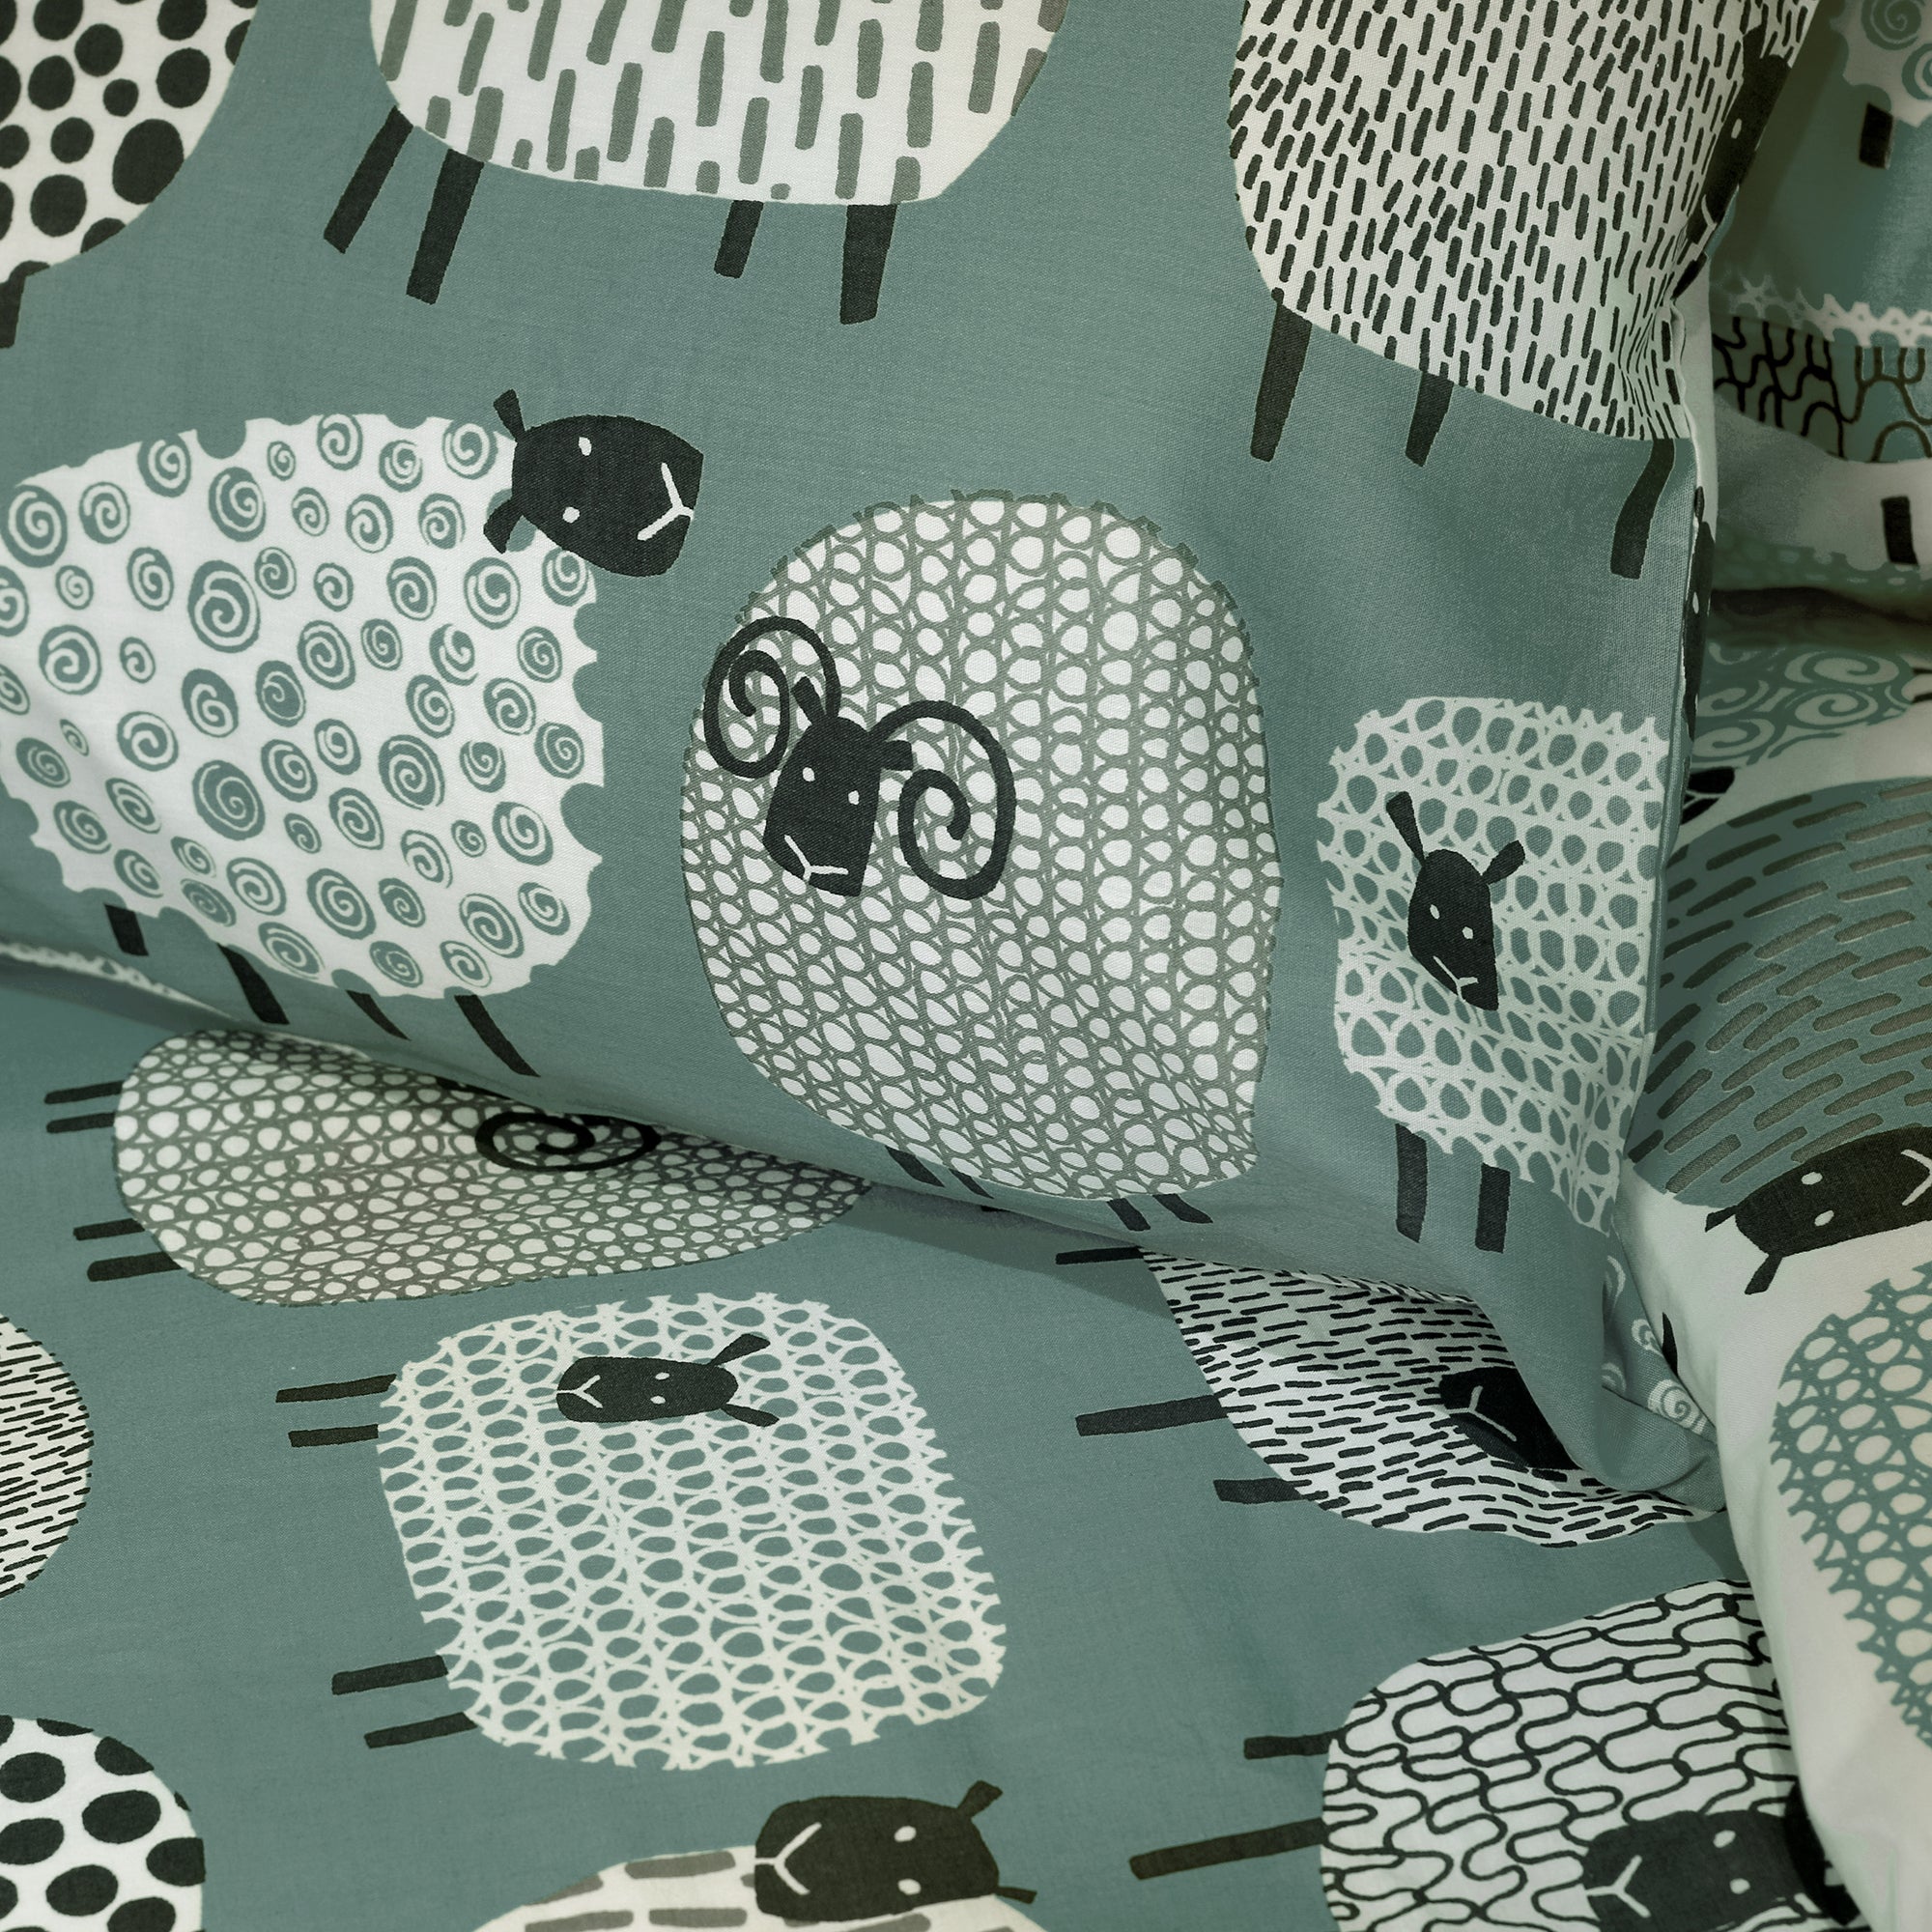 Dotty Sheep - Easy Care Duvet Cover Set in Duck Egg - By Fusion